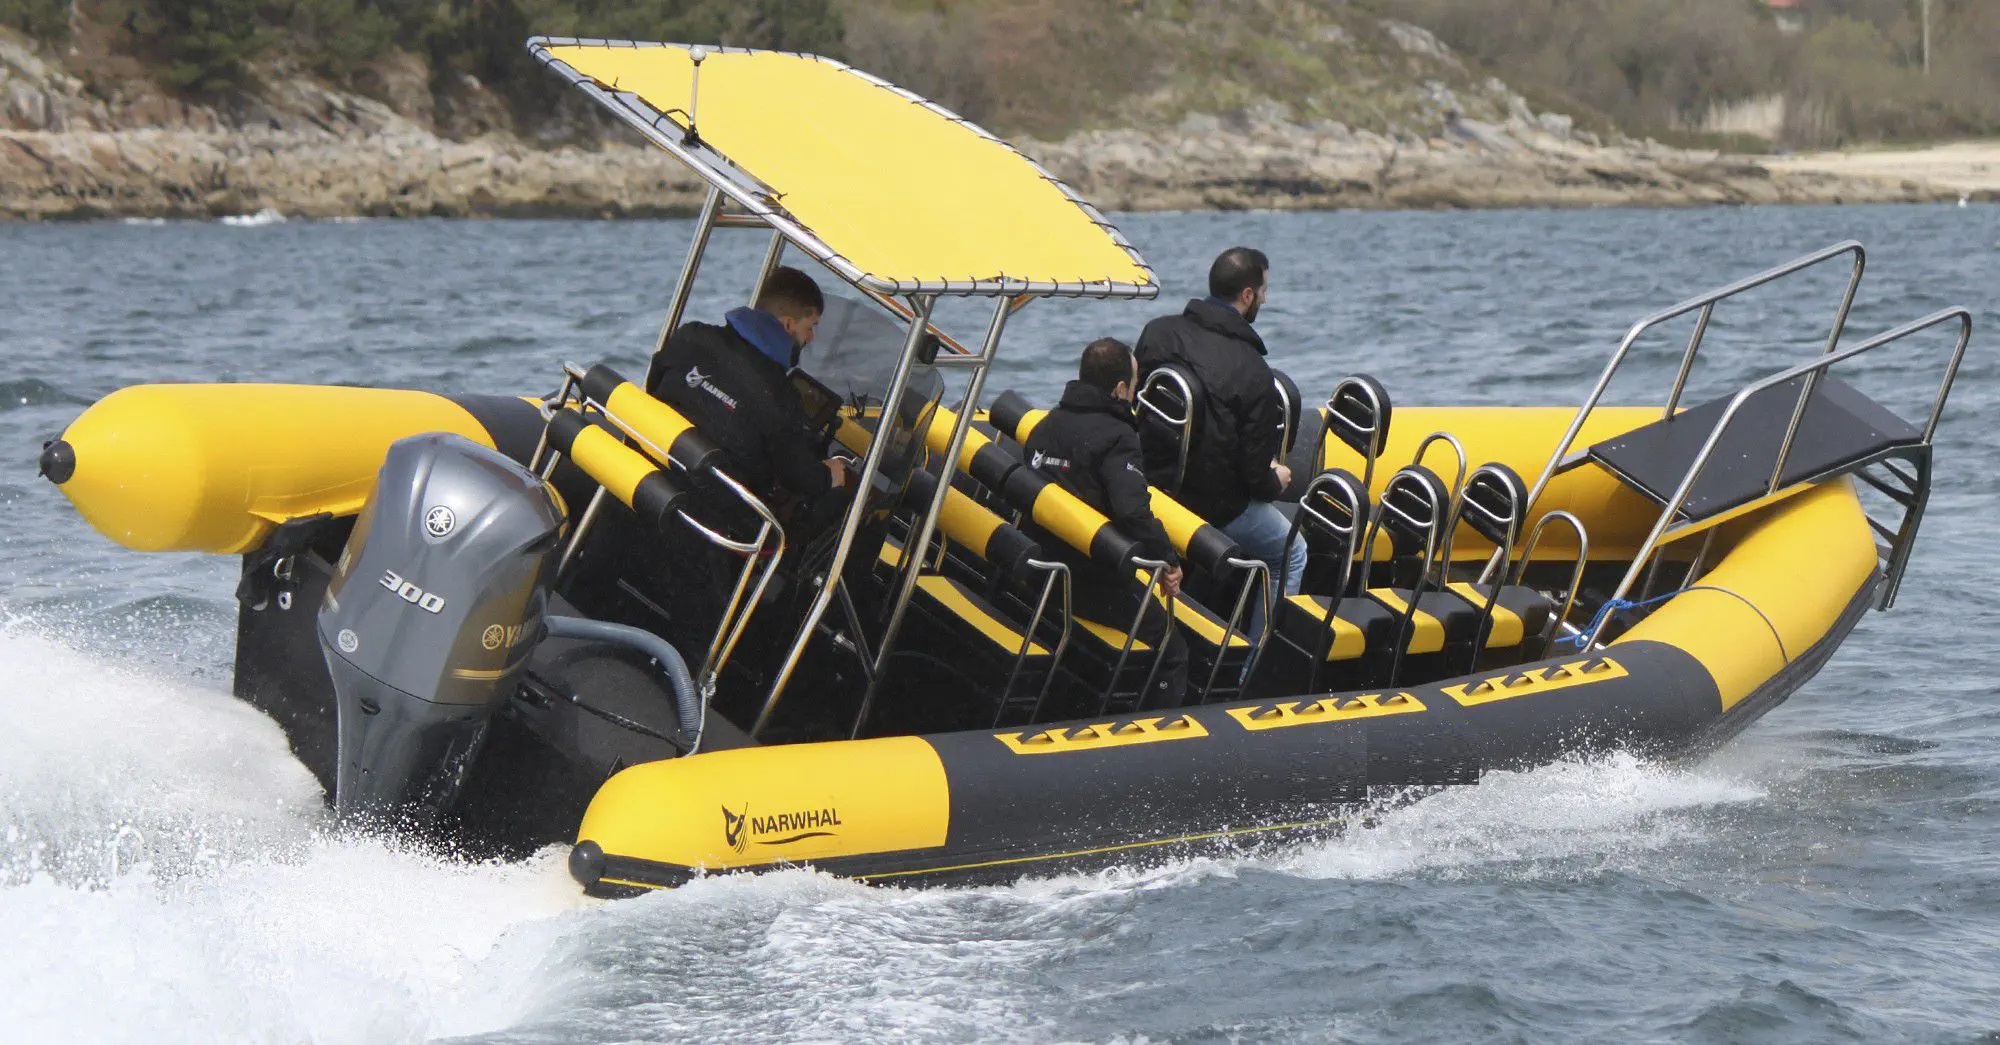 Black and yellow rib boat with T-top for navigation